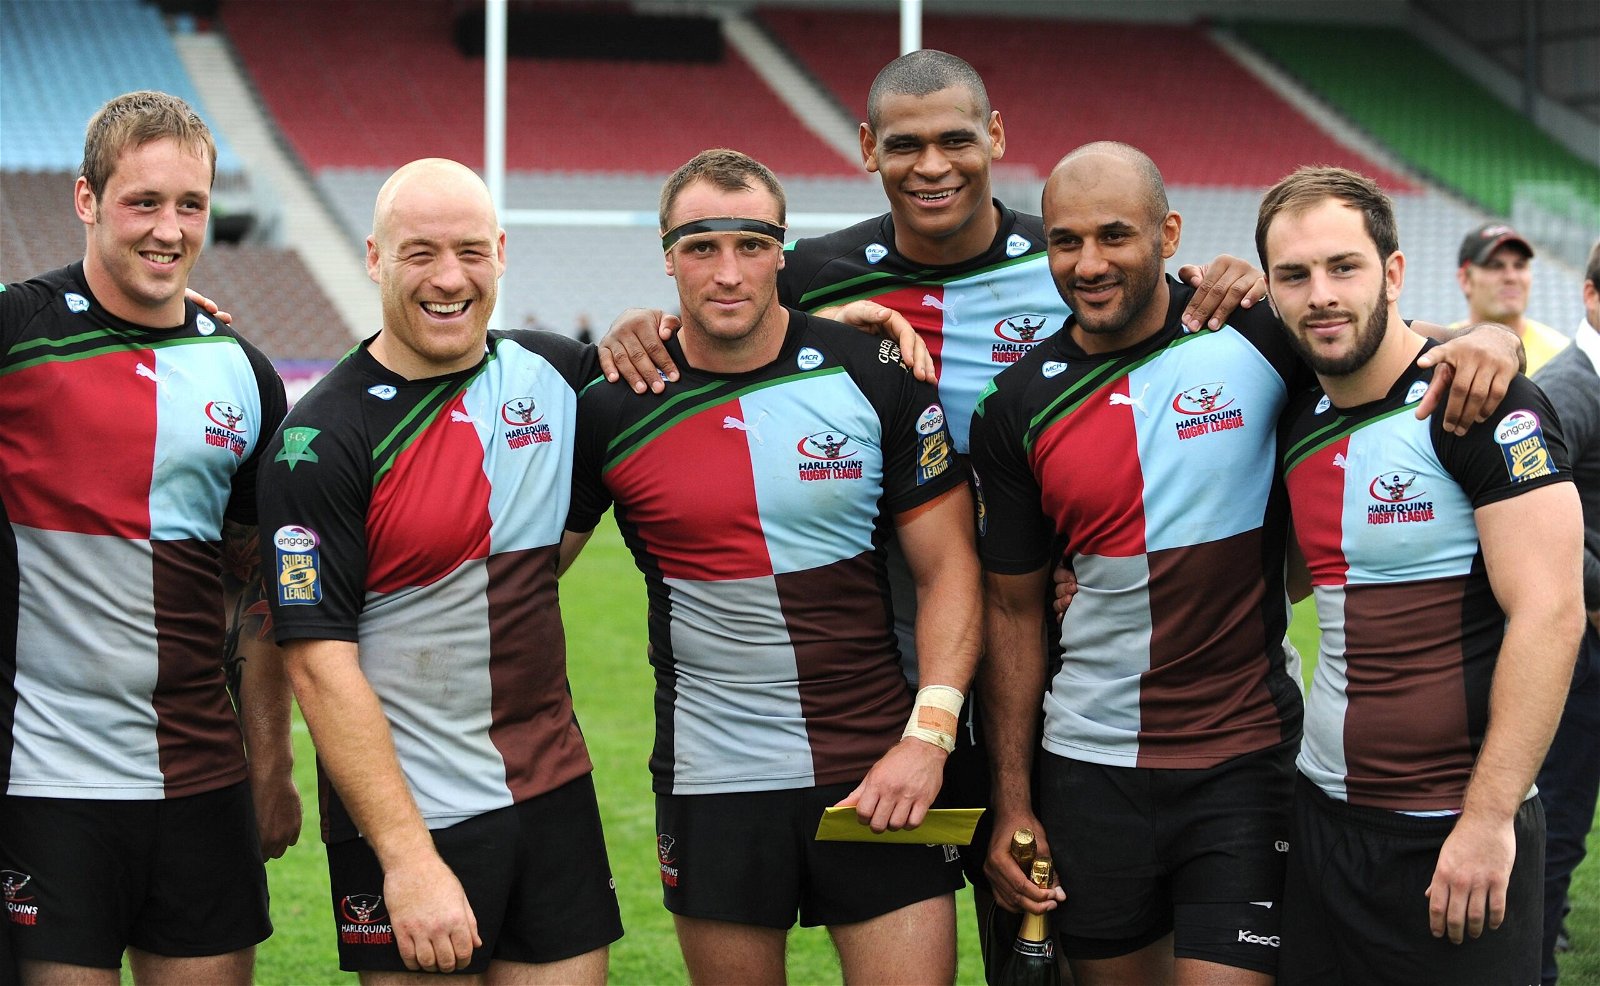 Harlequins RL players stand posing for the camera at an empty Twickenham Stoop, where London Broncos will face St Helens.